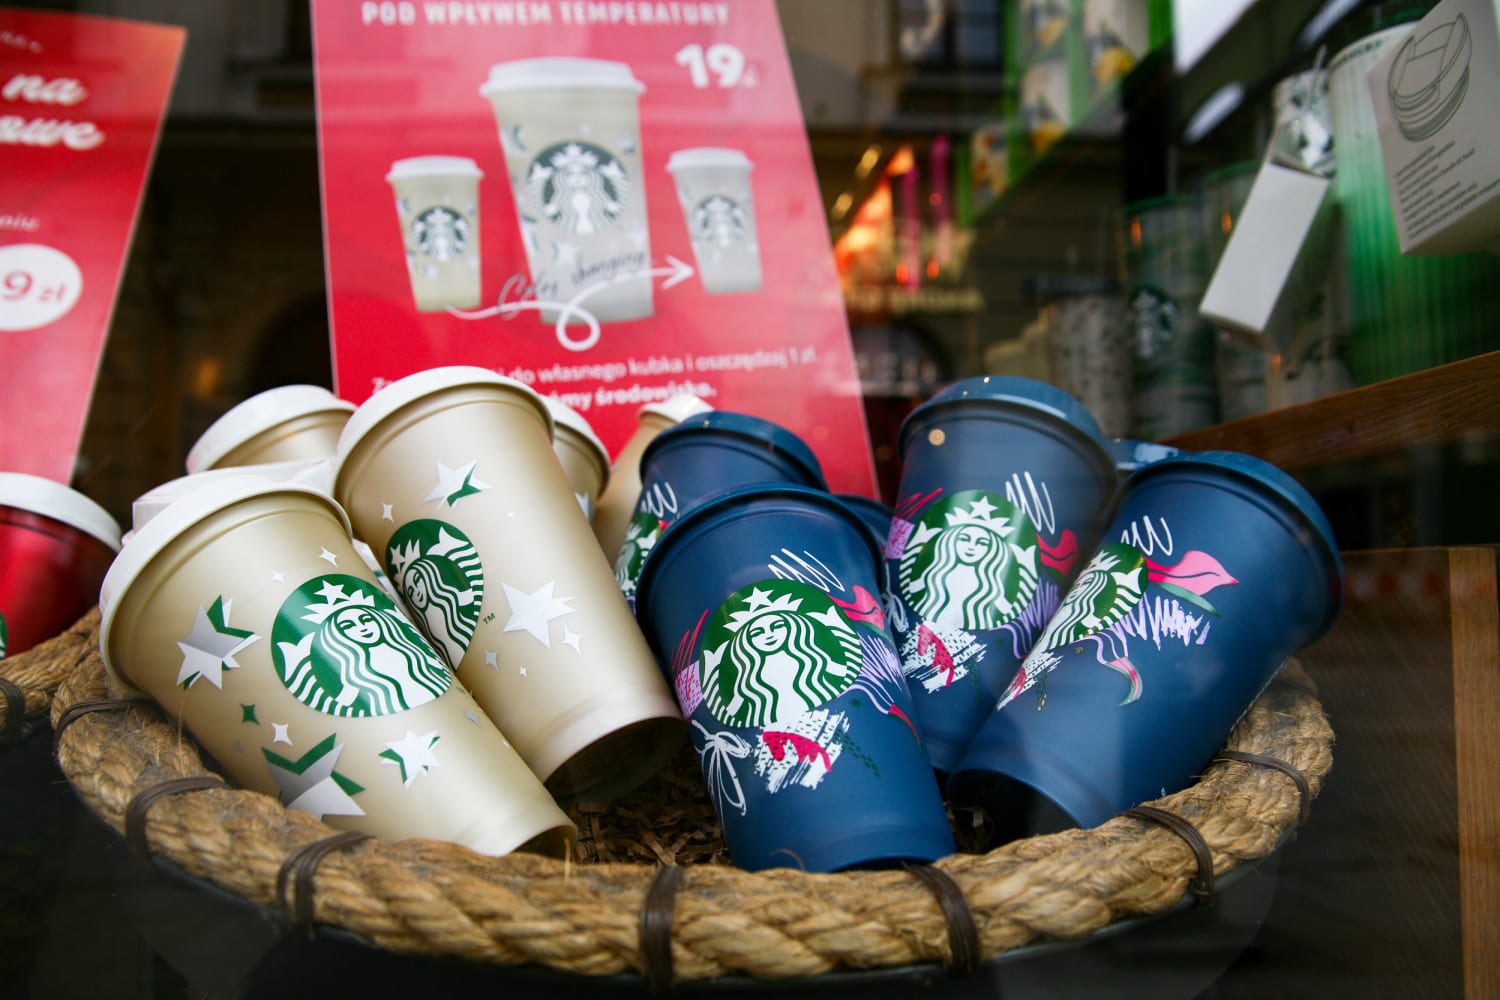 Starbucks Offering Discount to Customers With Reusable Cups